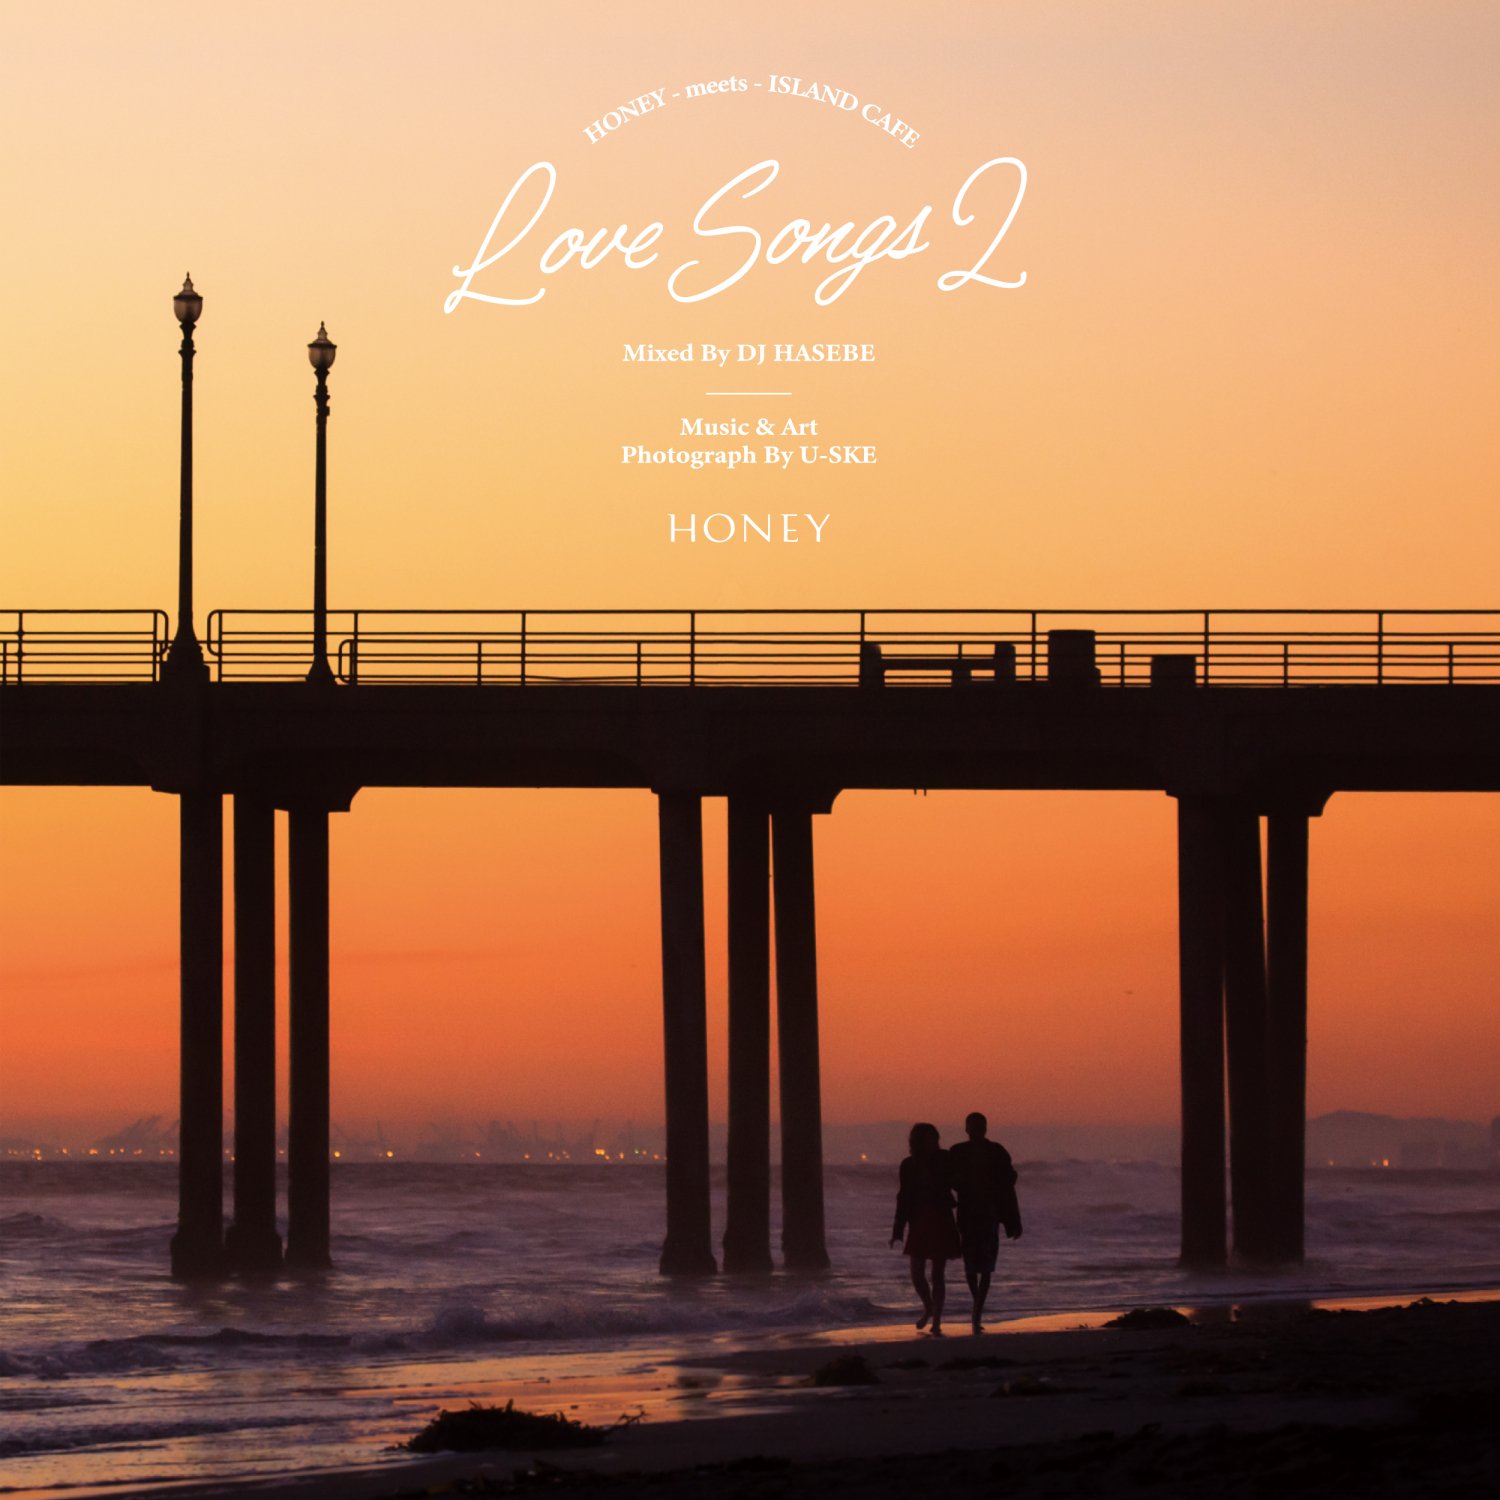 HONEY meets ISLAND CAFE -Love Songs 2- mixed by DJ HASEBE